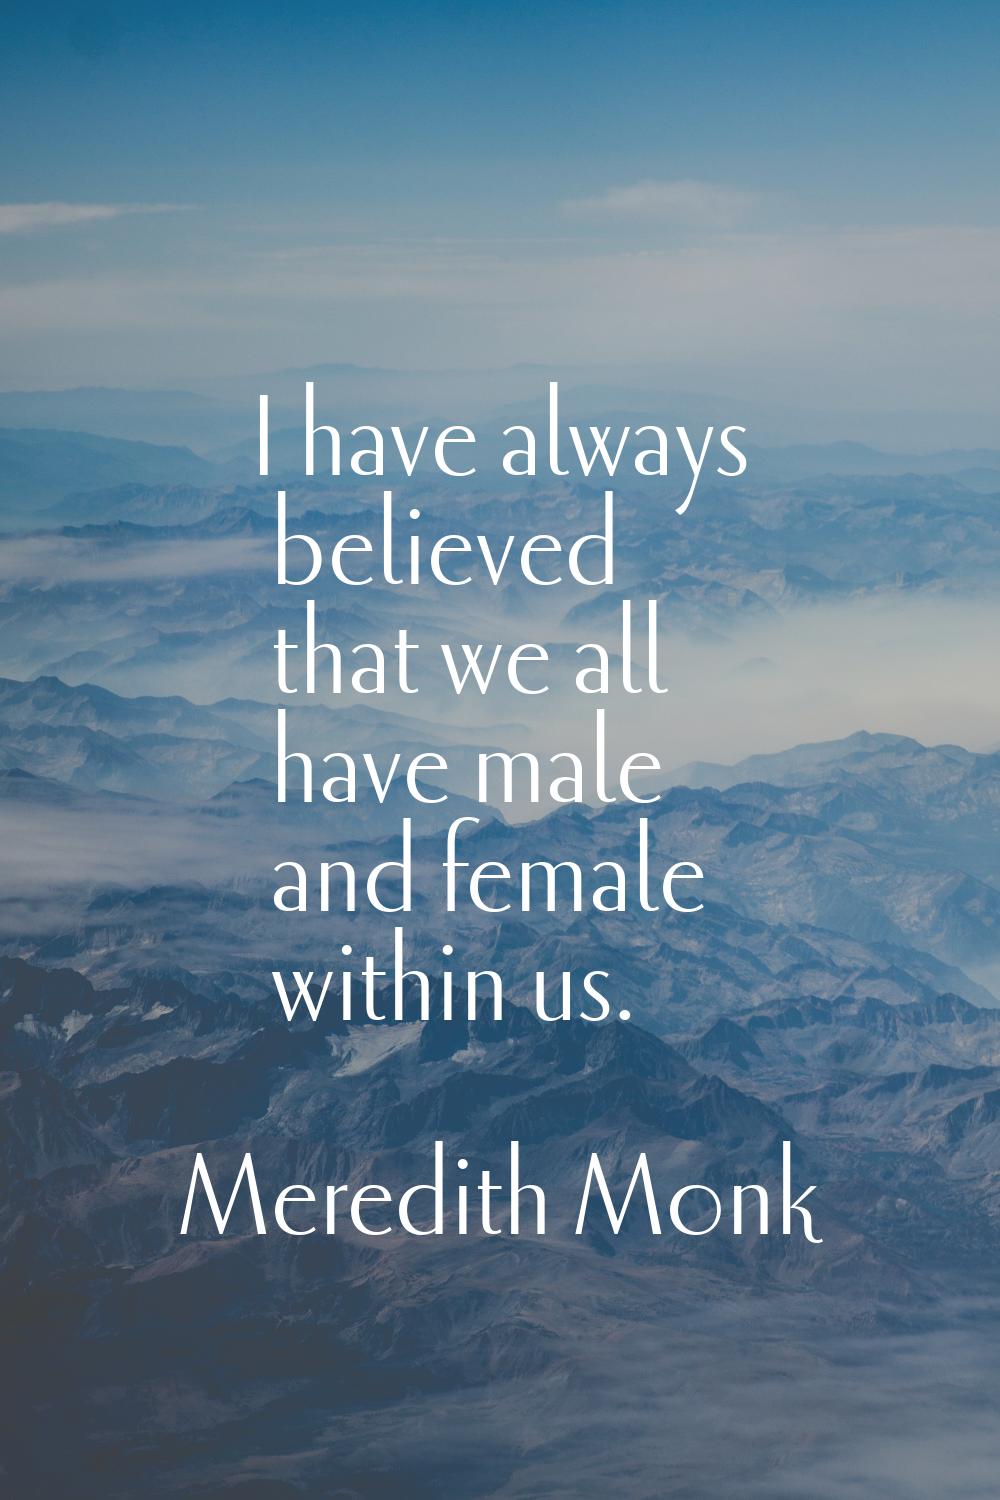 I have always believed that we all have male and female within us.